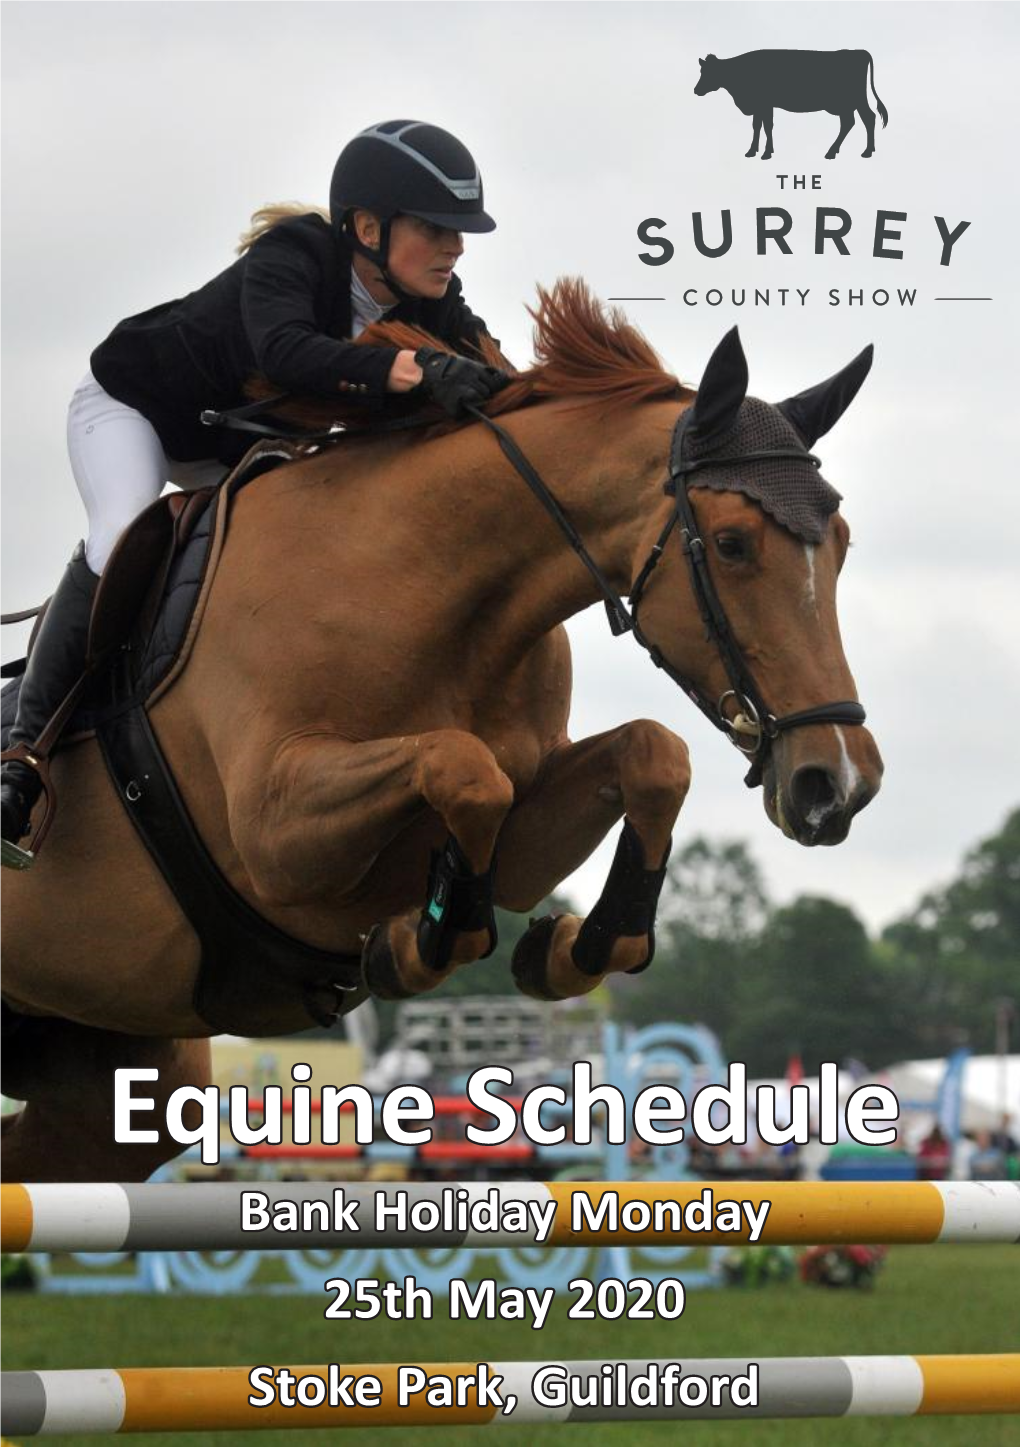 Equine Schedule Bank Holiday Monday 25Th May 2020 Stoke Park, Guildford 6 Vet General Equine Practice